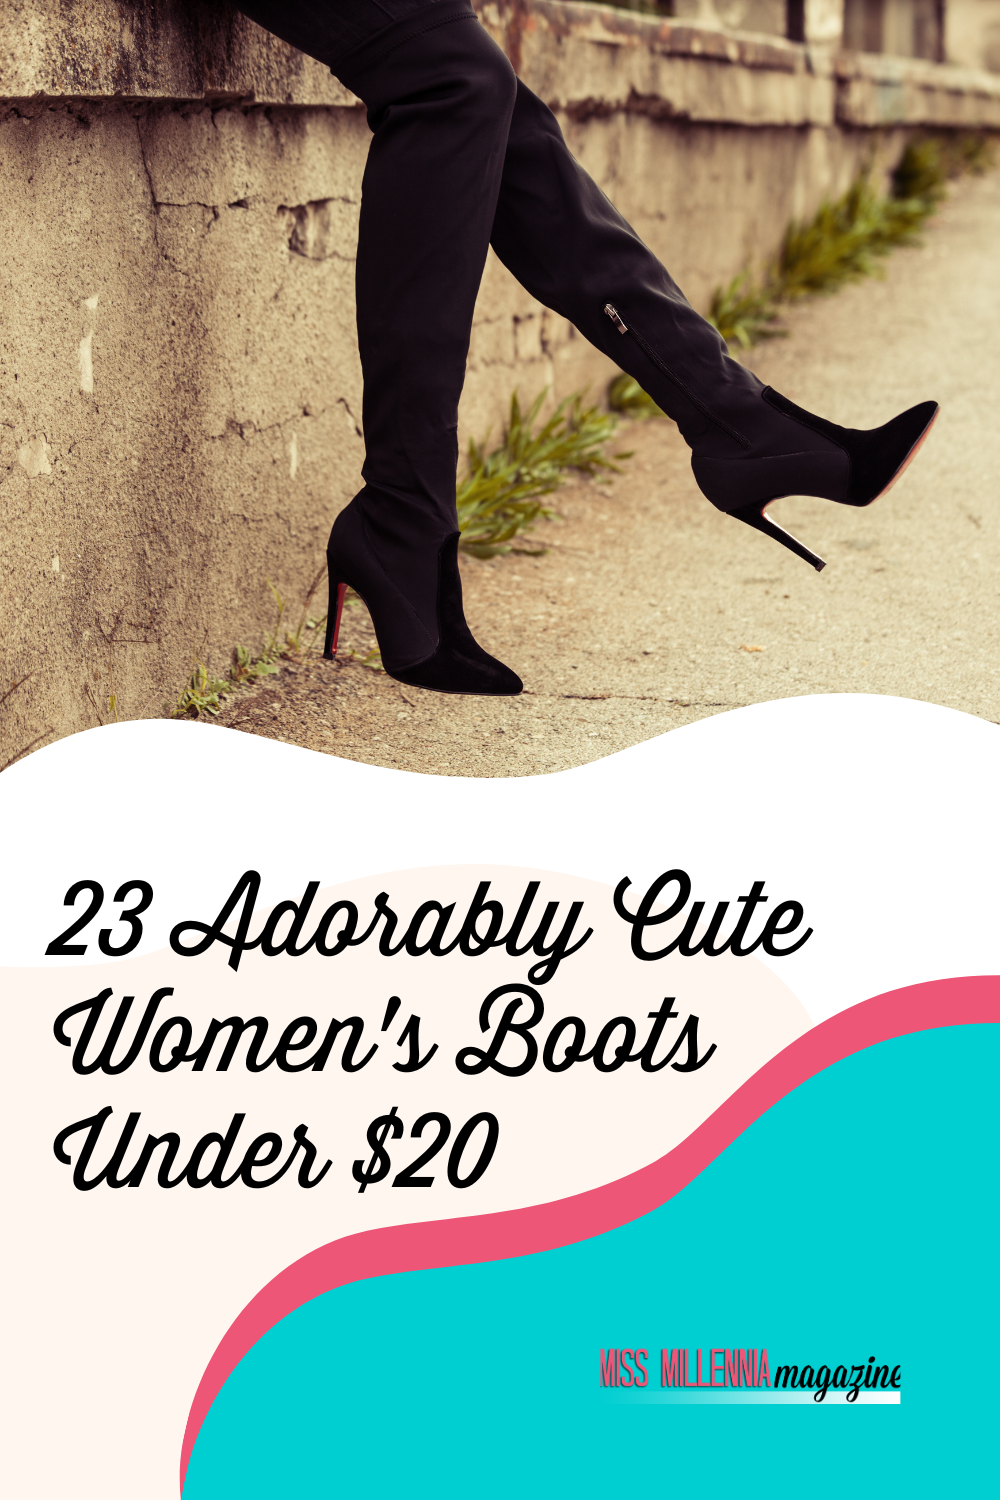 23 Adorably Cute Women’s Boots Under $20